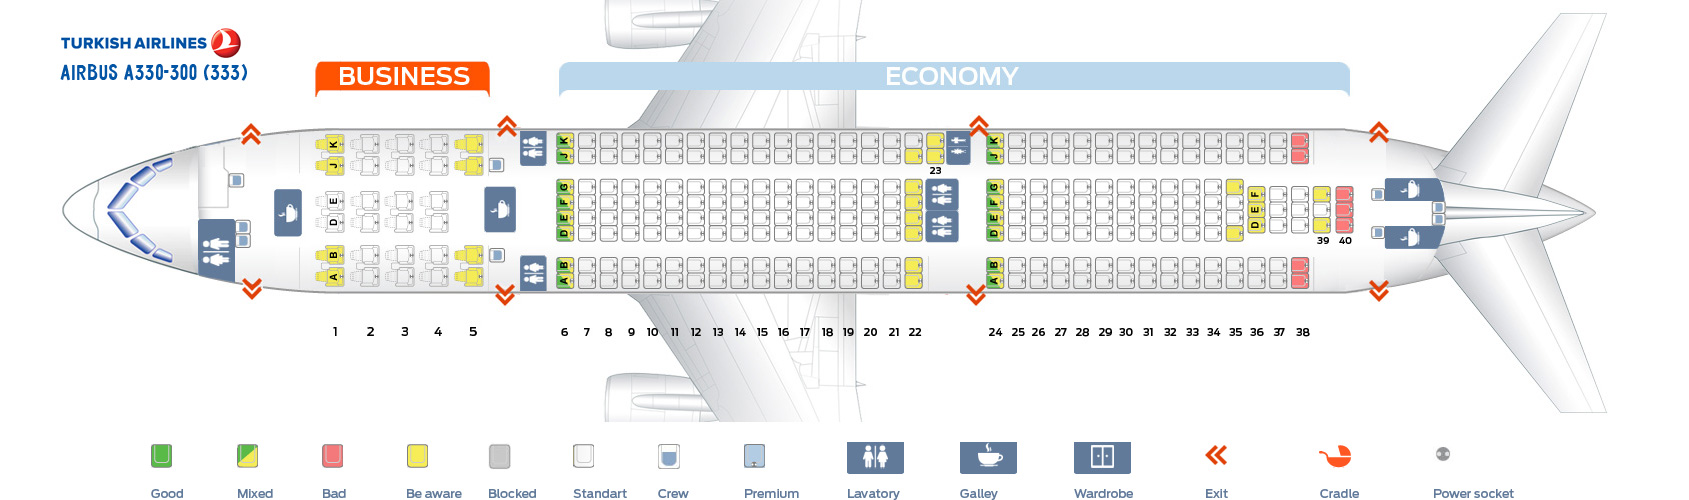 Seat Map Airbus A330-300 Turkish Airlines